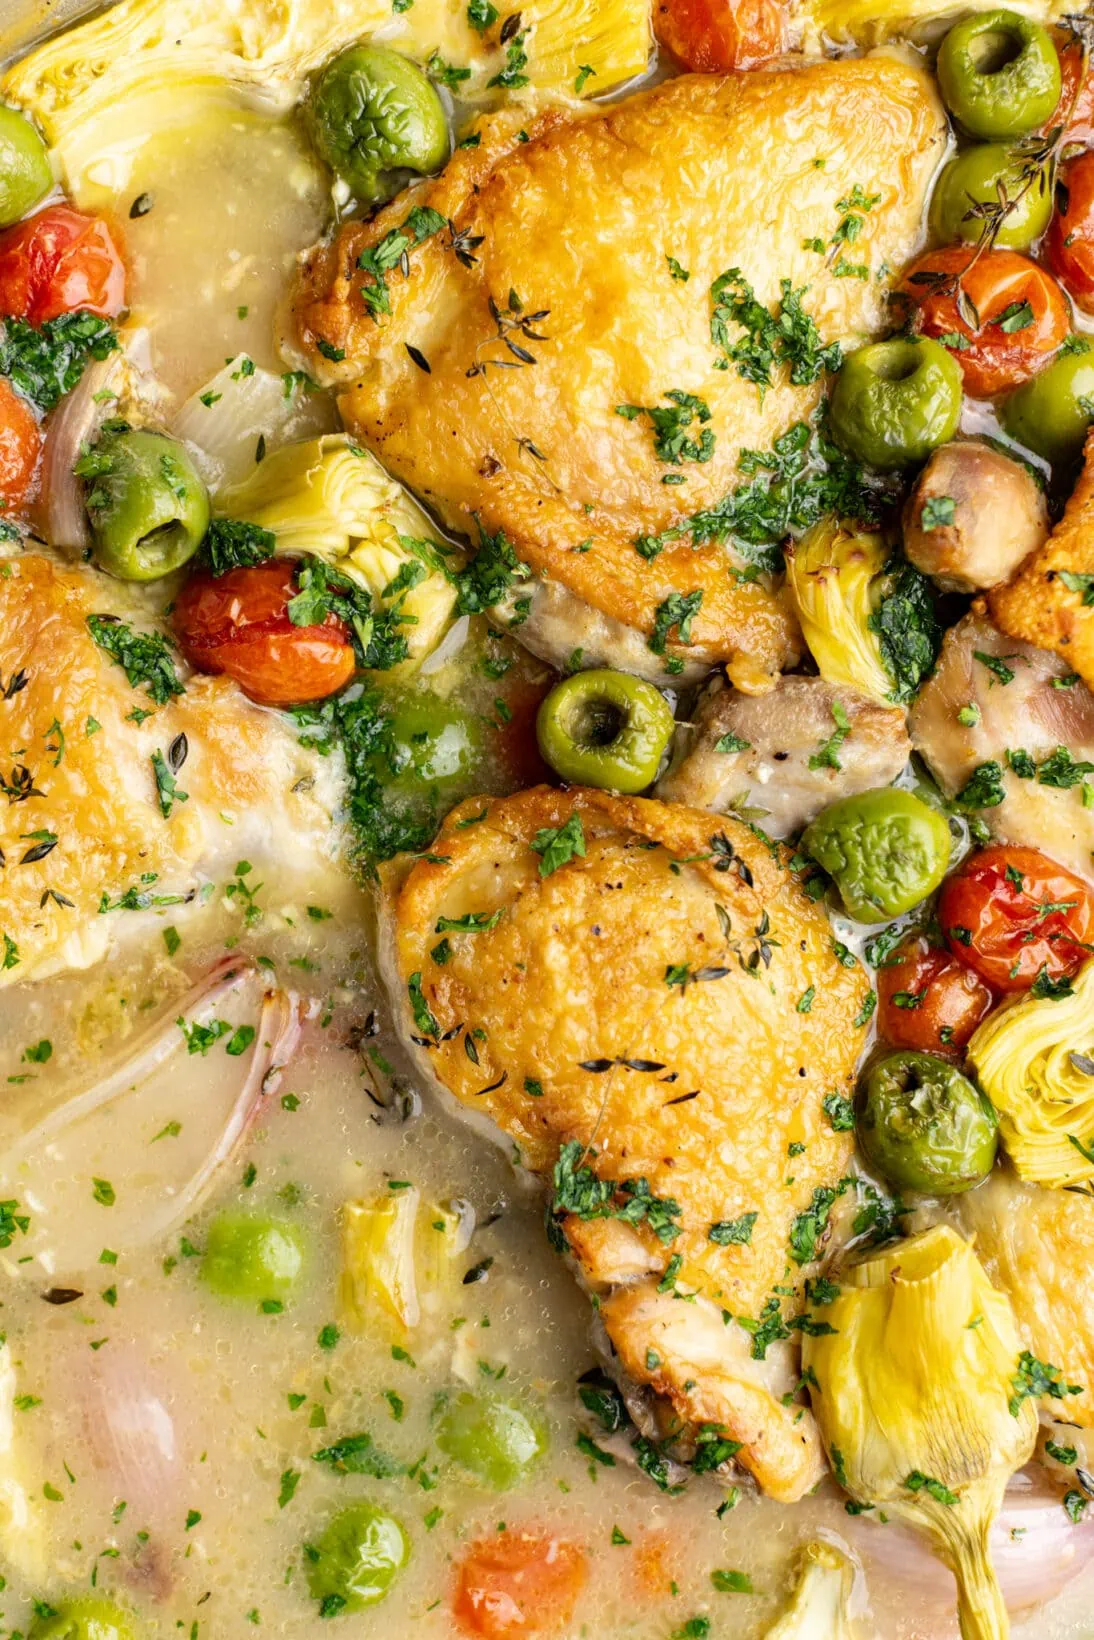 up close chicken provençal with artichokes, olives, tomatoes, shallots.